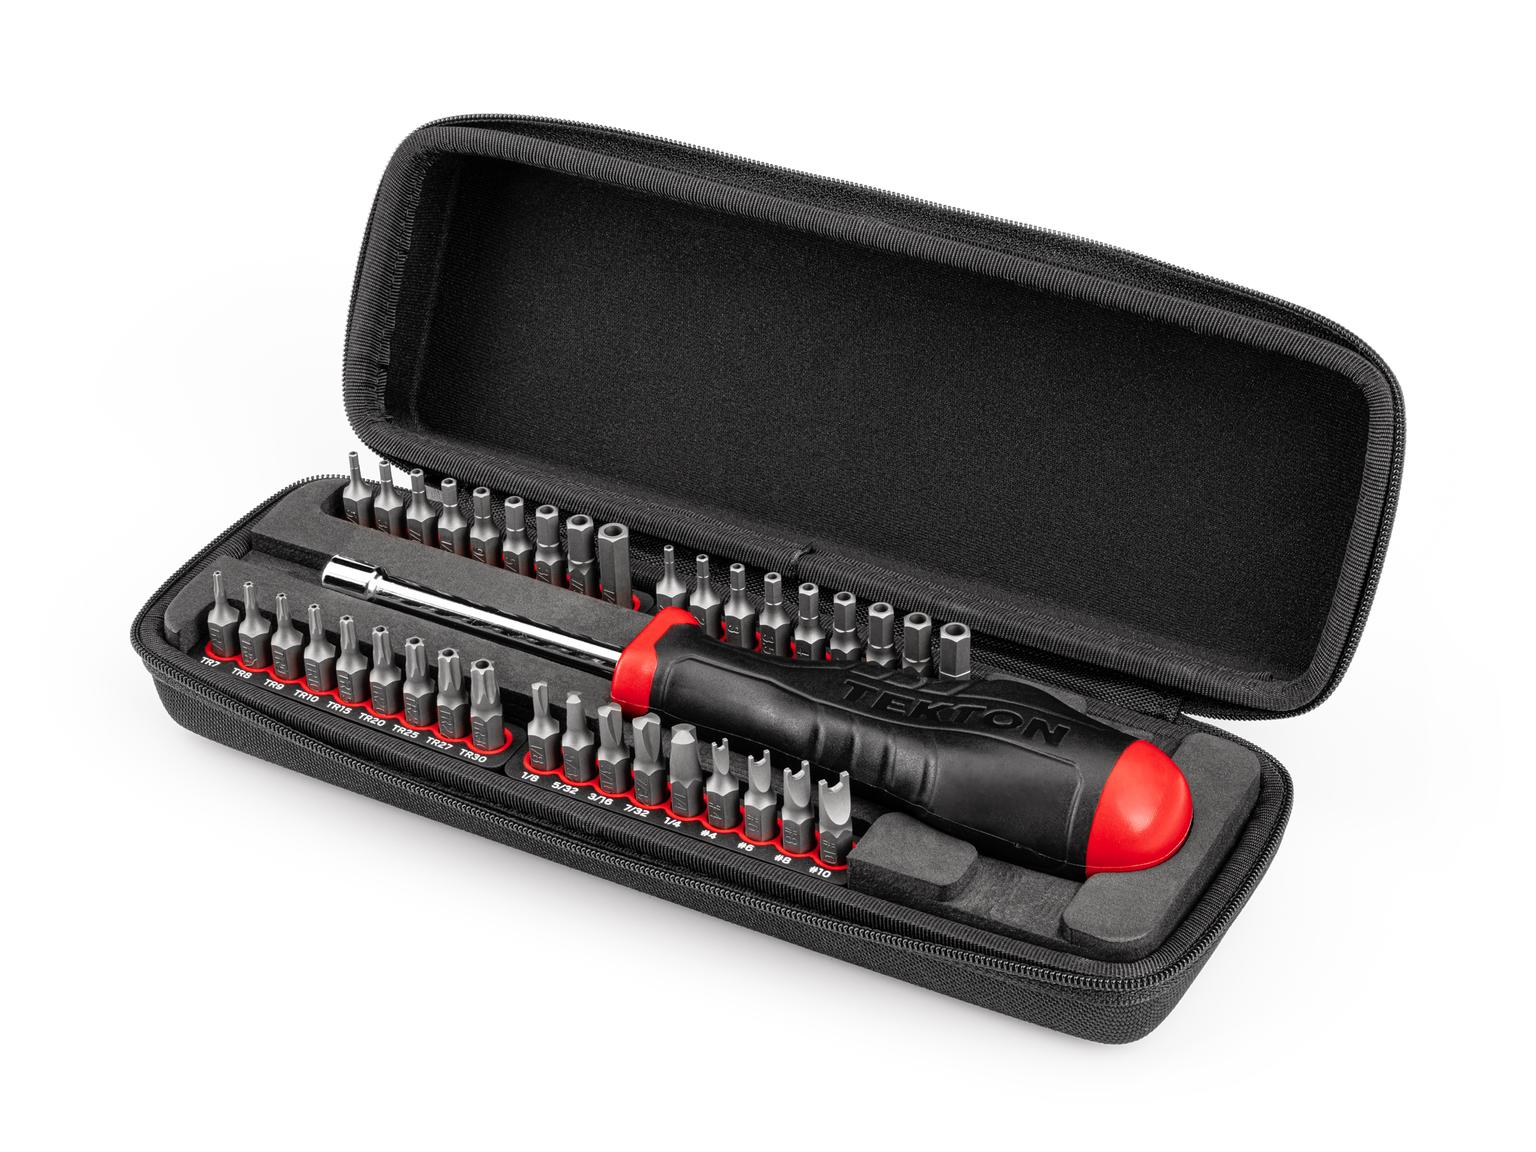 TEKTON DBH93102-T 1/4 Inch Security Bit Driver and Bit Set with Case, 37-Piece